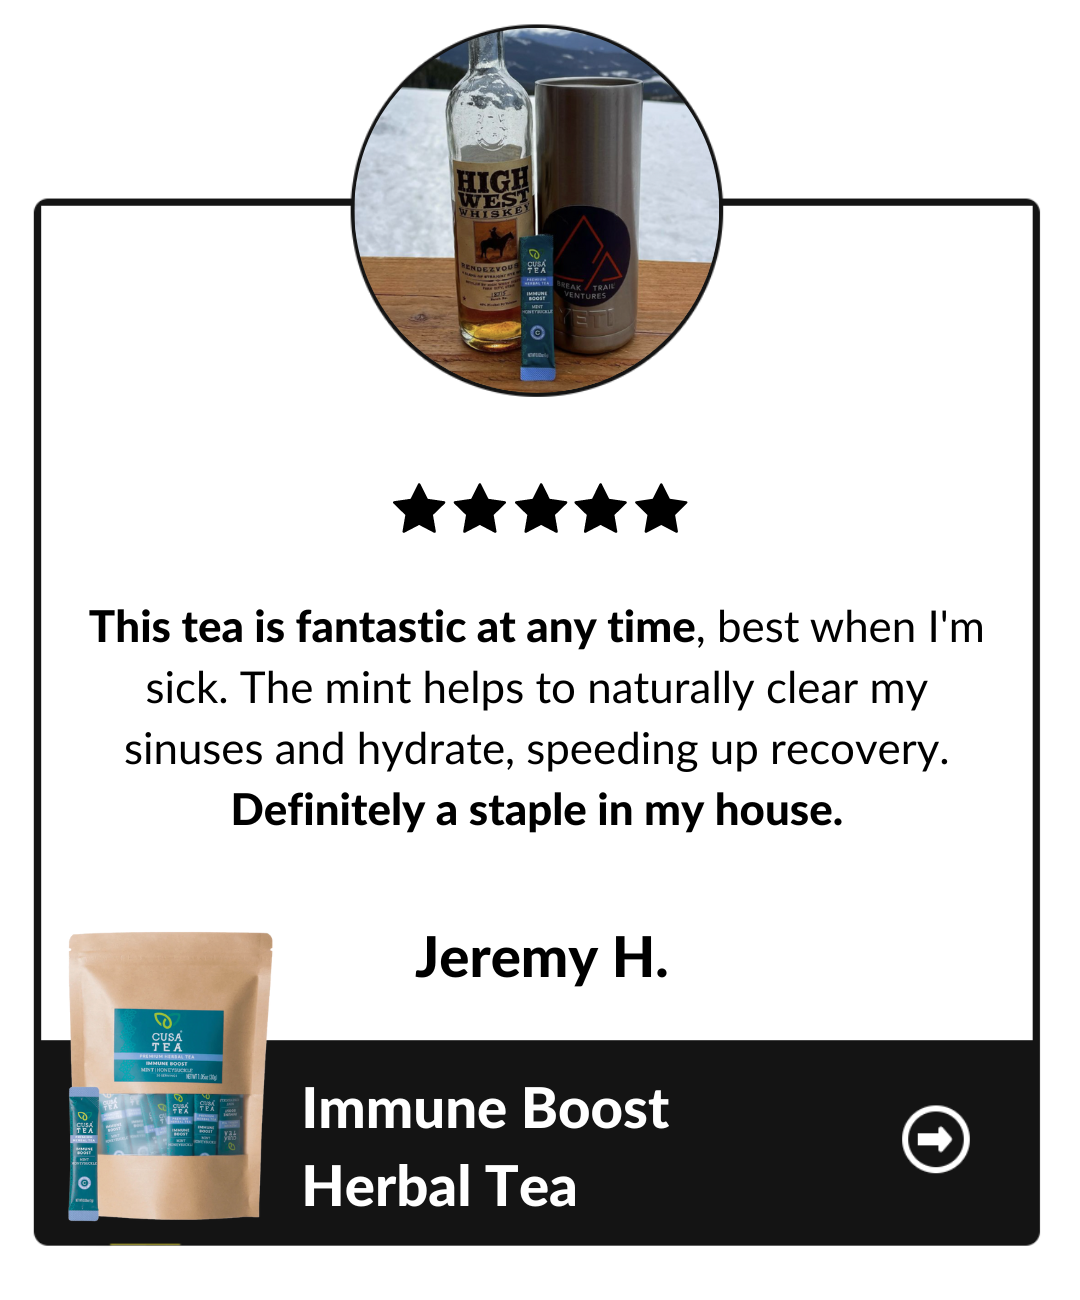 This tea is fantastic at any time, best when i'm sick. The mint helps to naturally clear my sinuses and hydrate, speeding up recovery. Definitely a staple in my house. Jeremy H, Immune Boost Herbal Tea testimonial